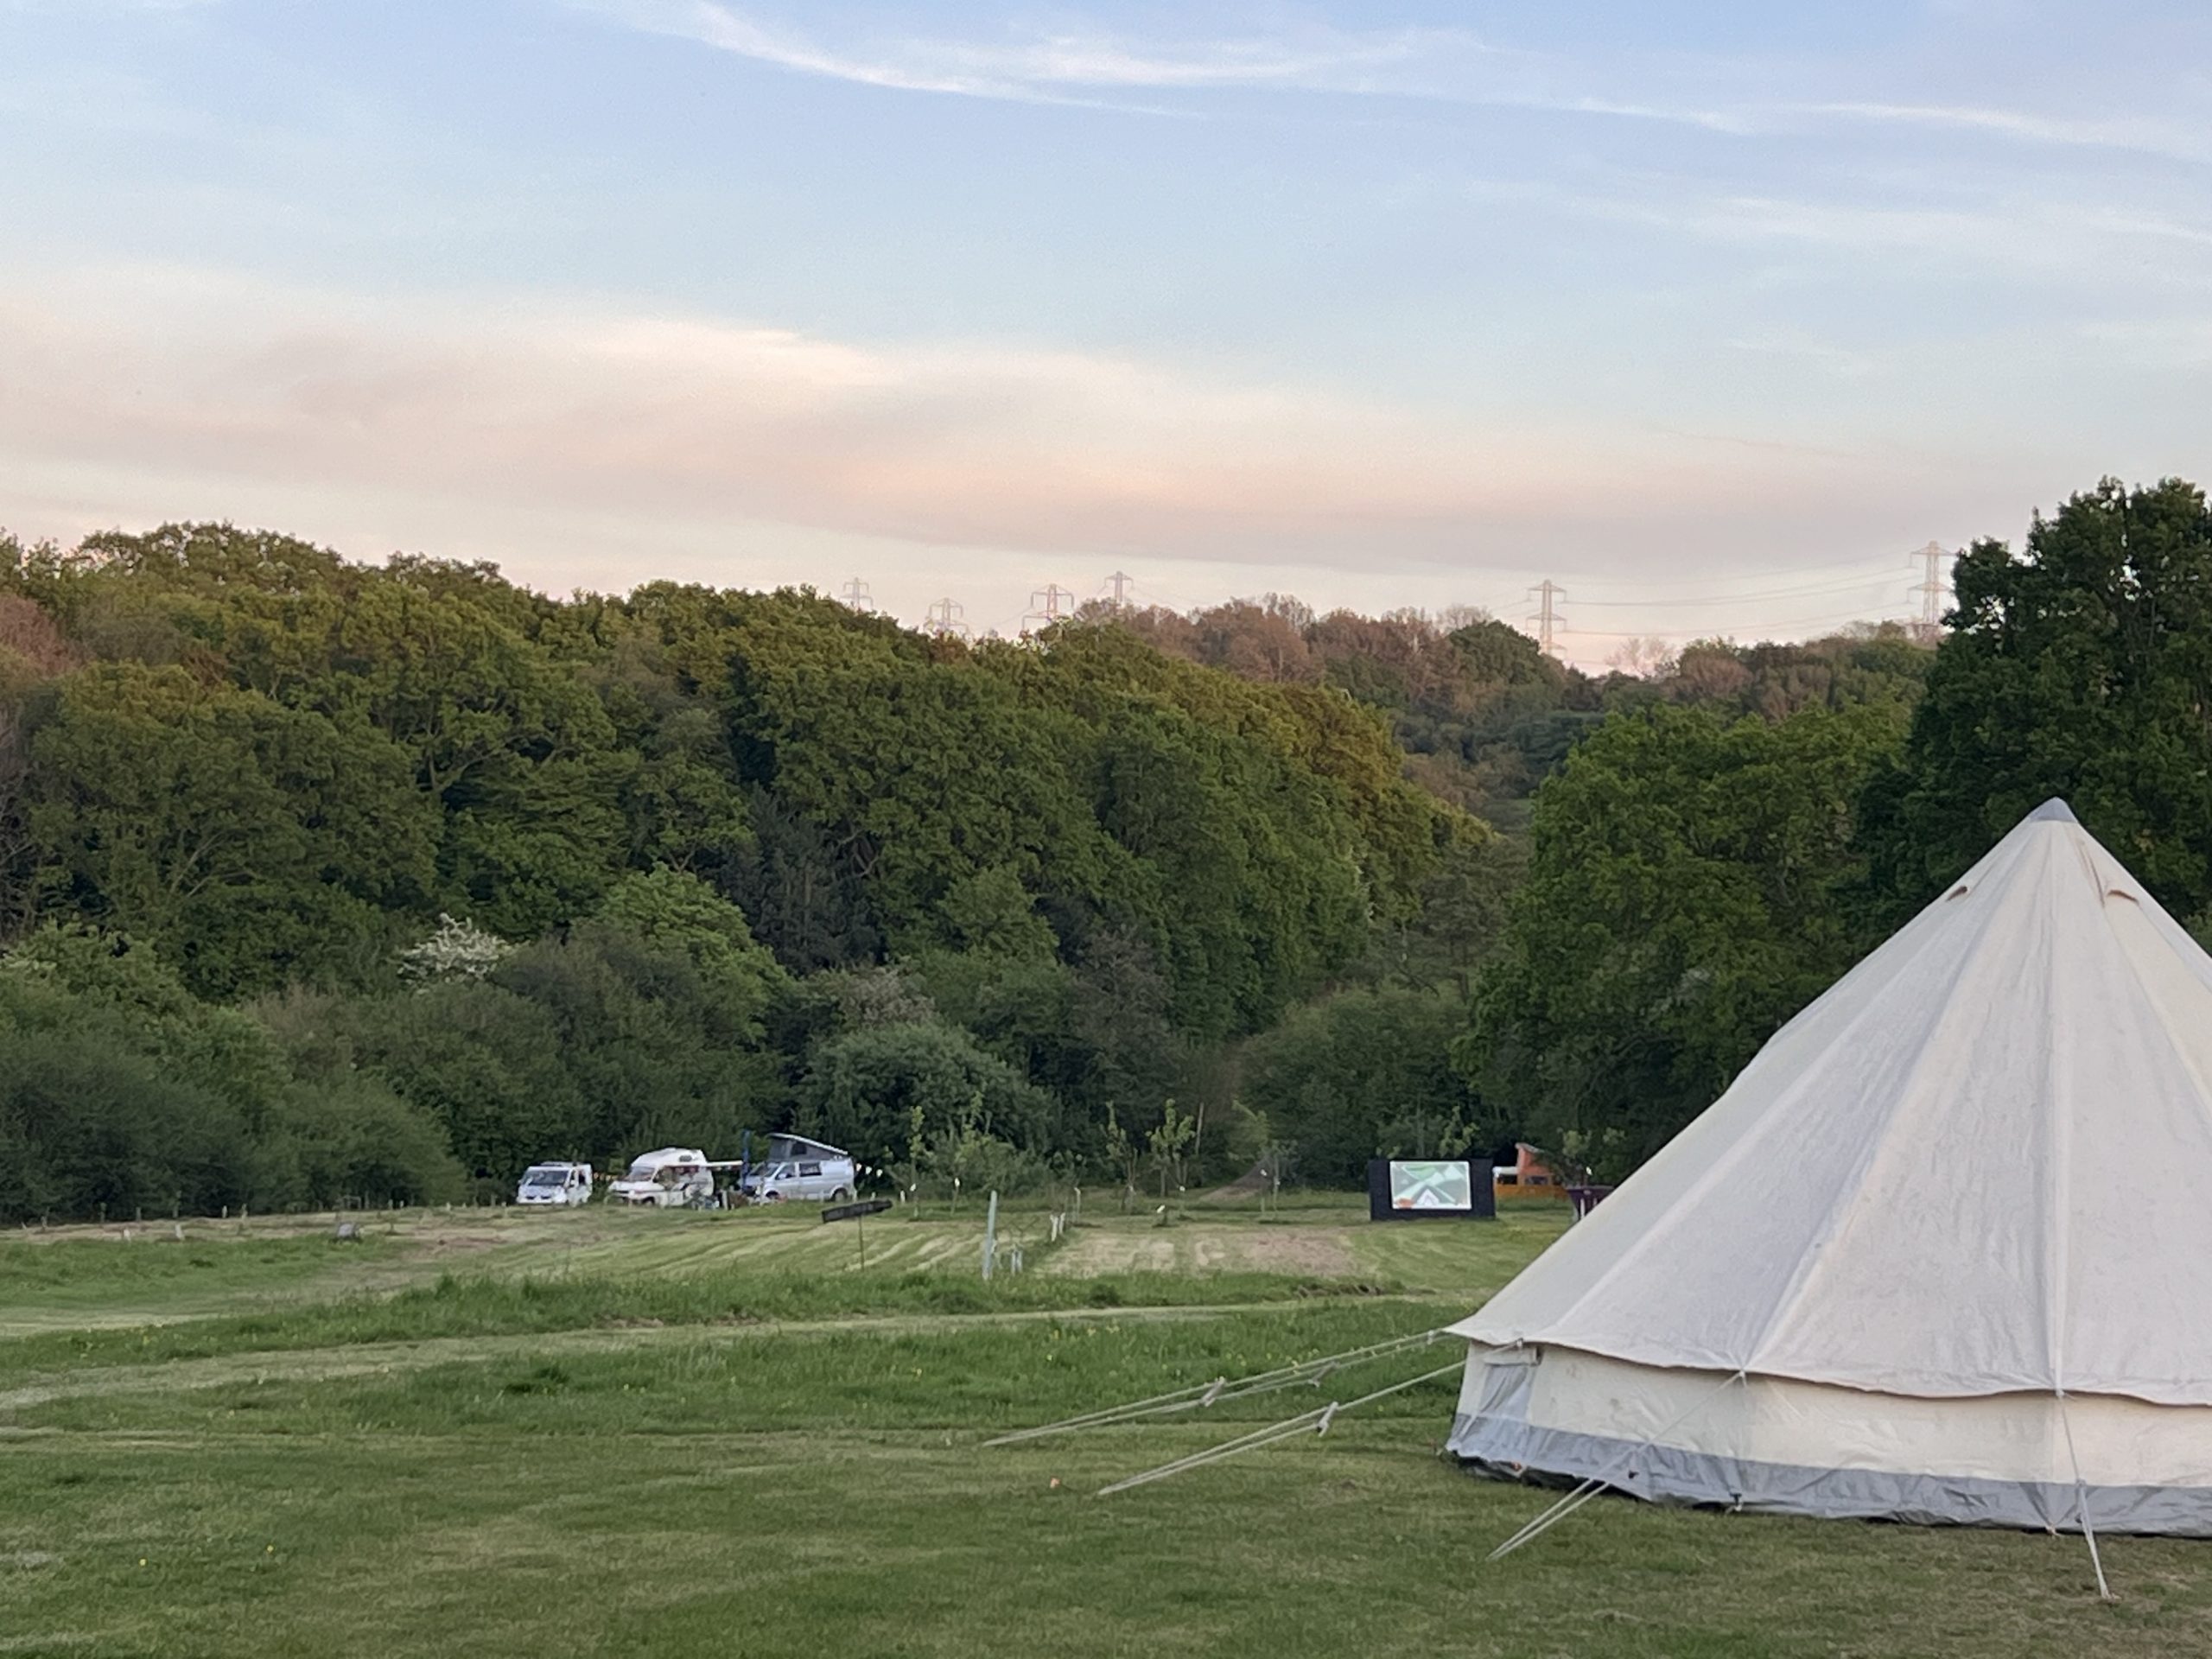 20 acres of chilled out campsite in sussex